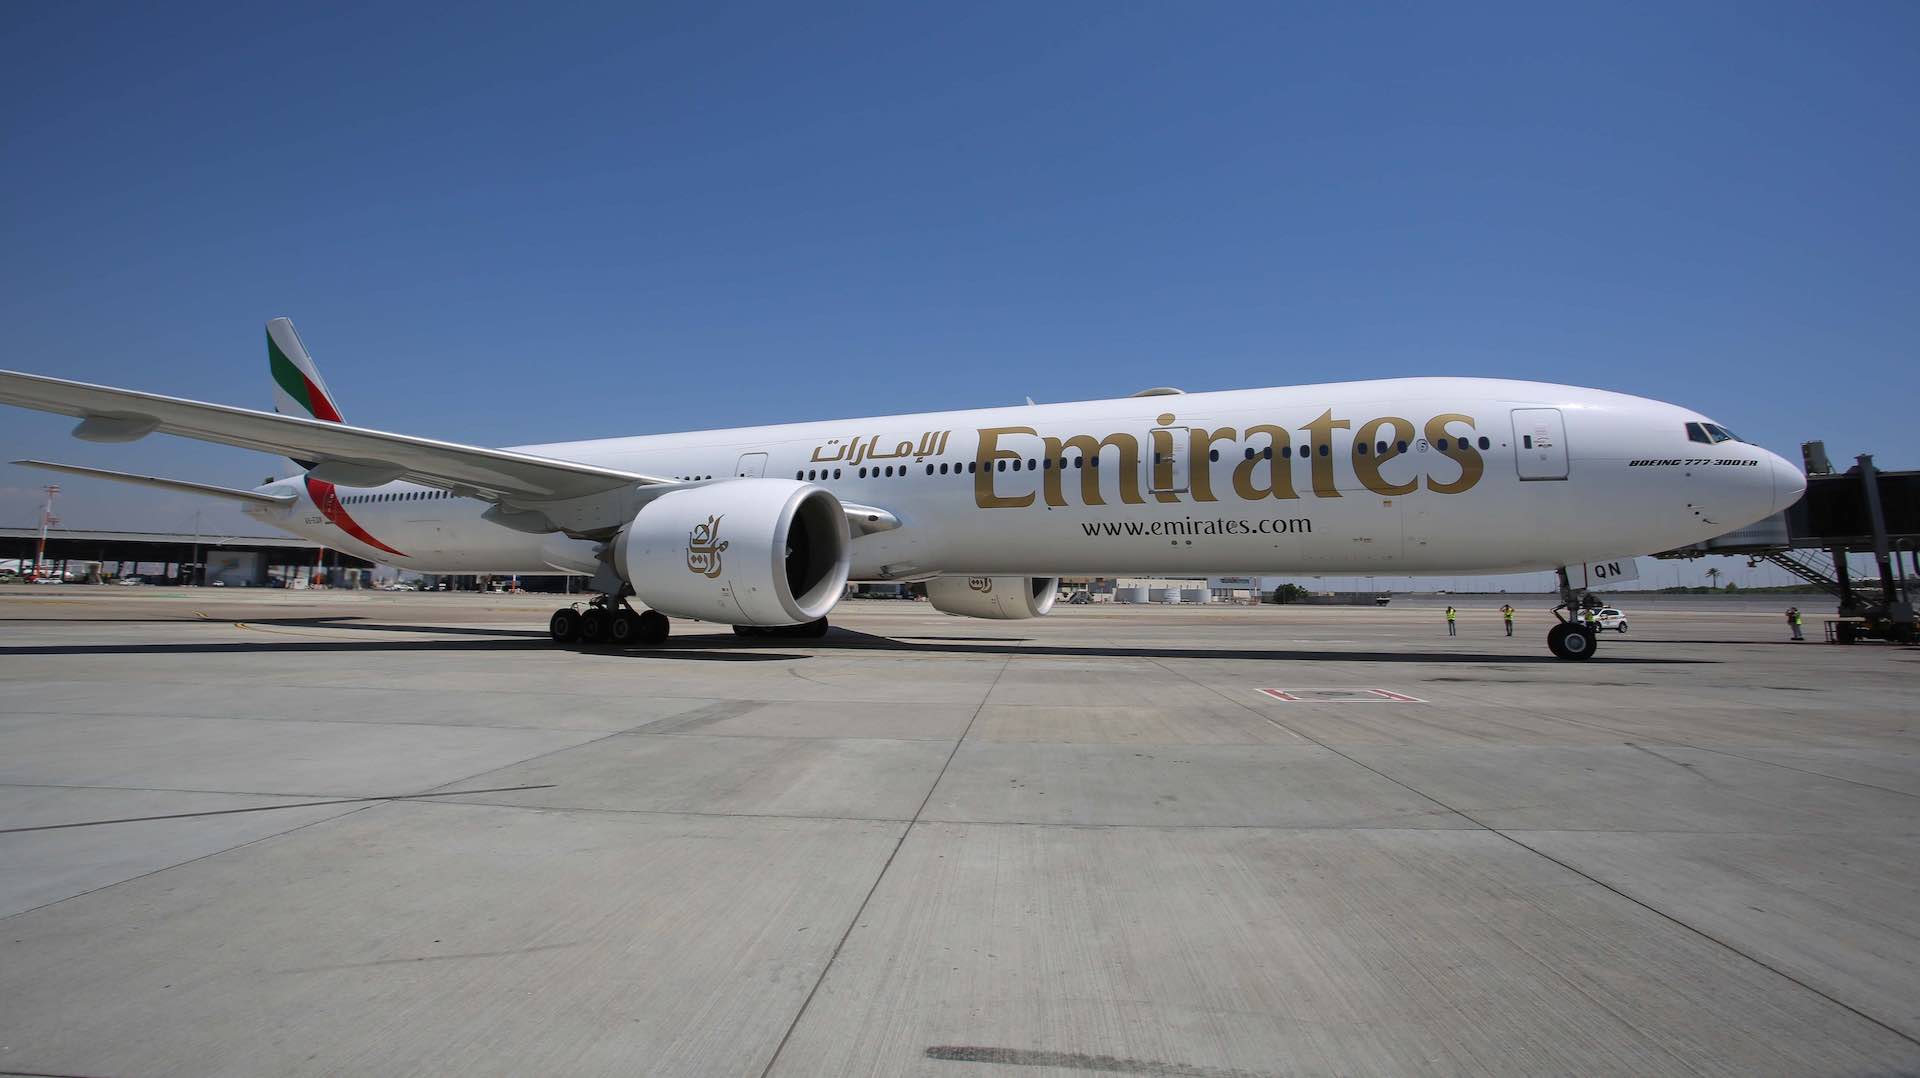 Emirates adds a second daily flight to its Tel Aviv schedule